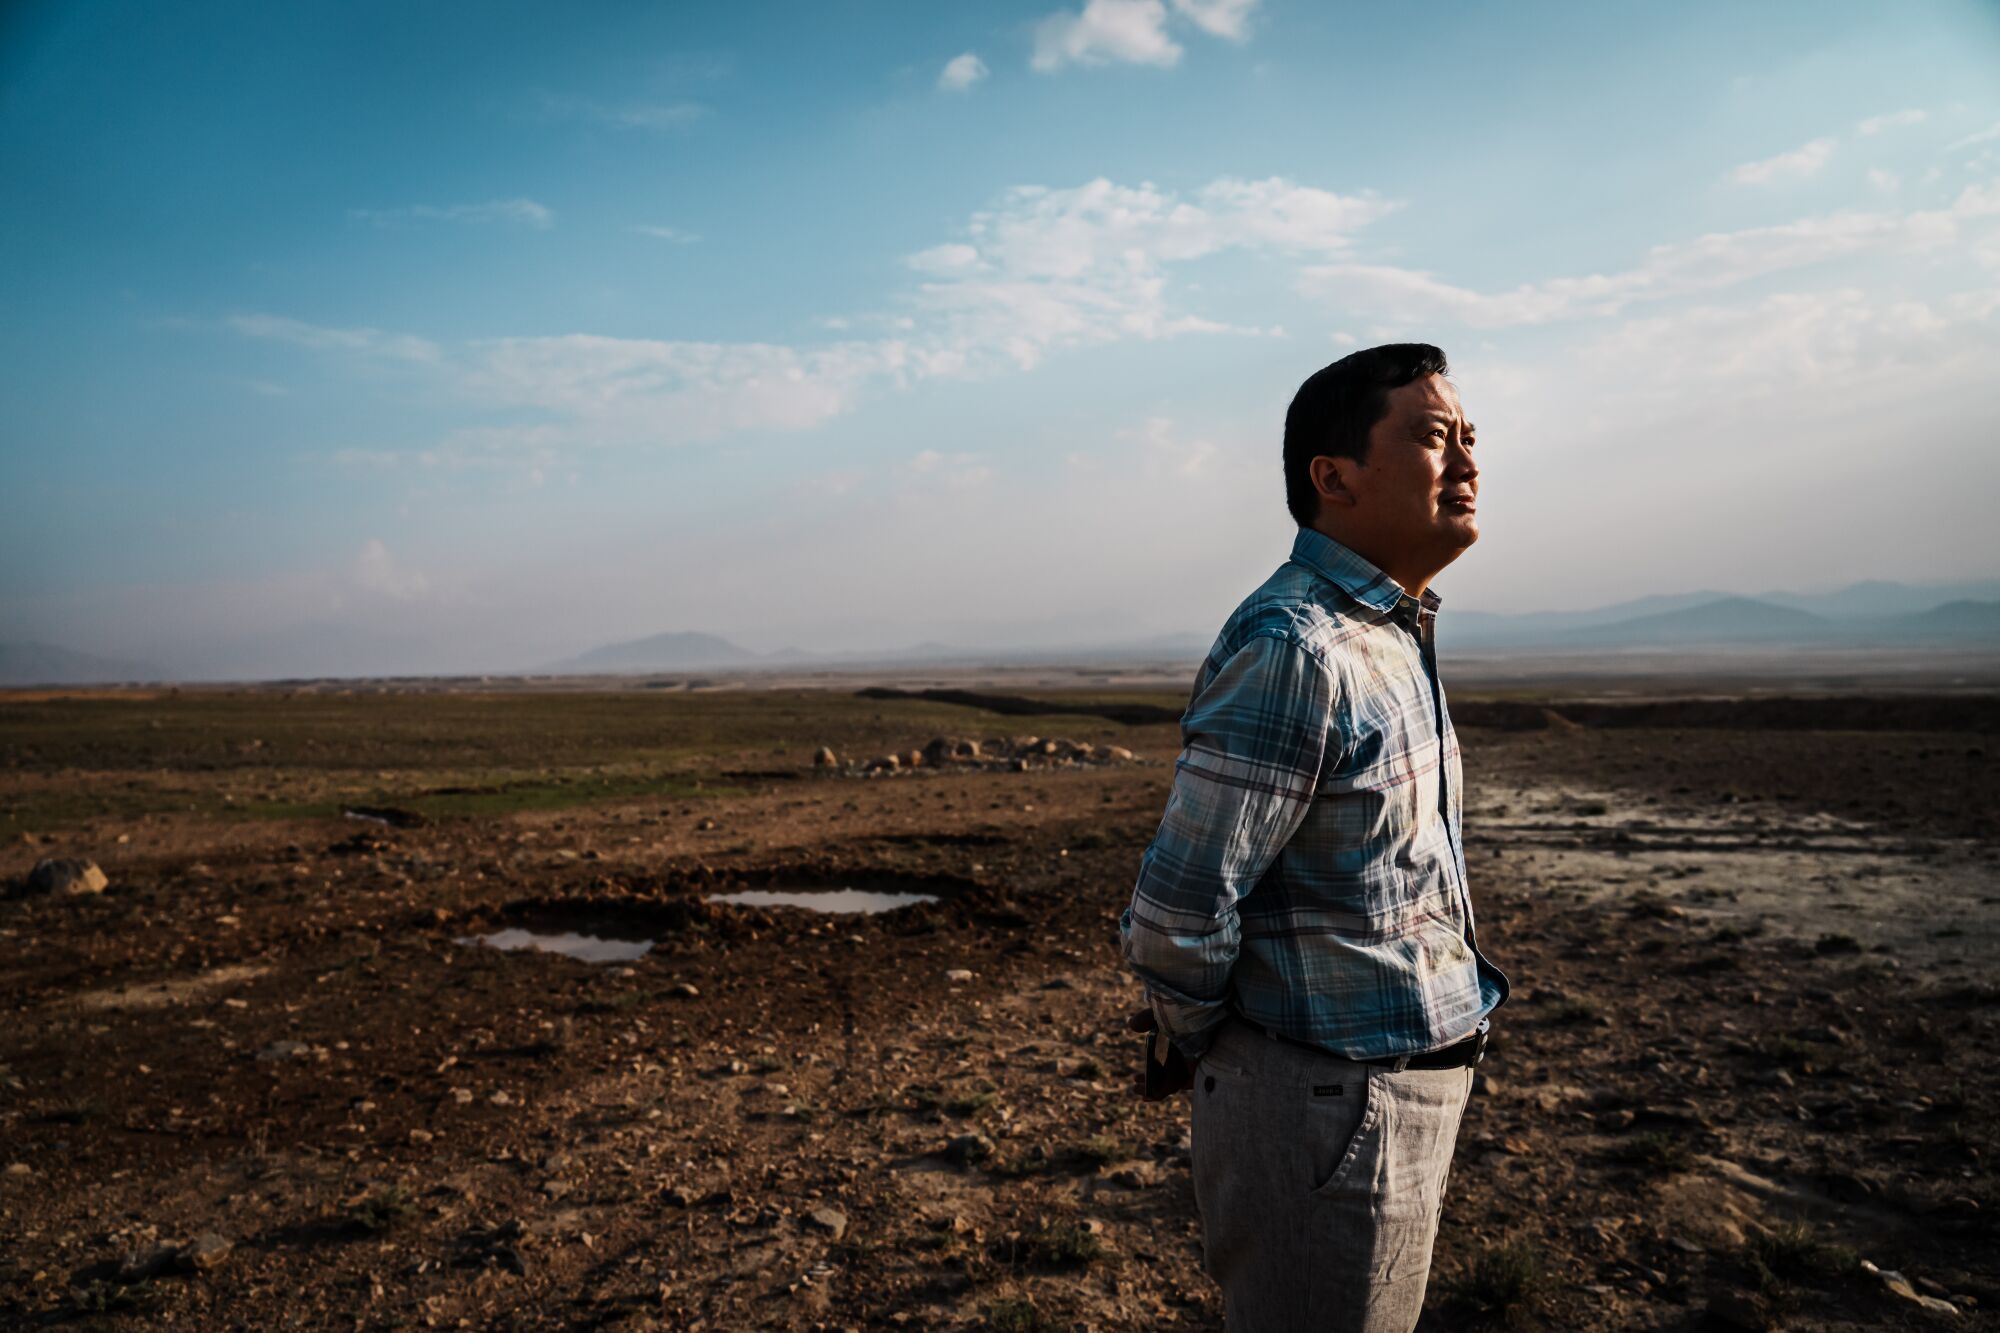 A man in a blue checked shirt and khaki pants stands in the middle of a barren land under a blue sky